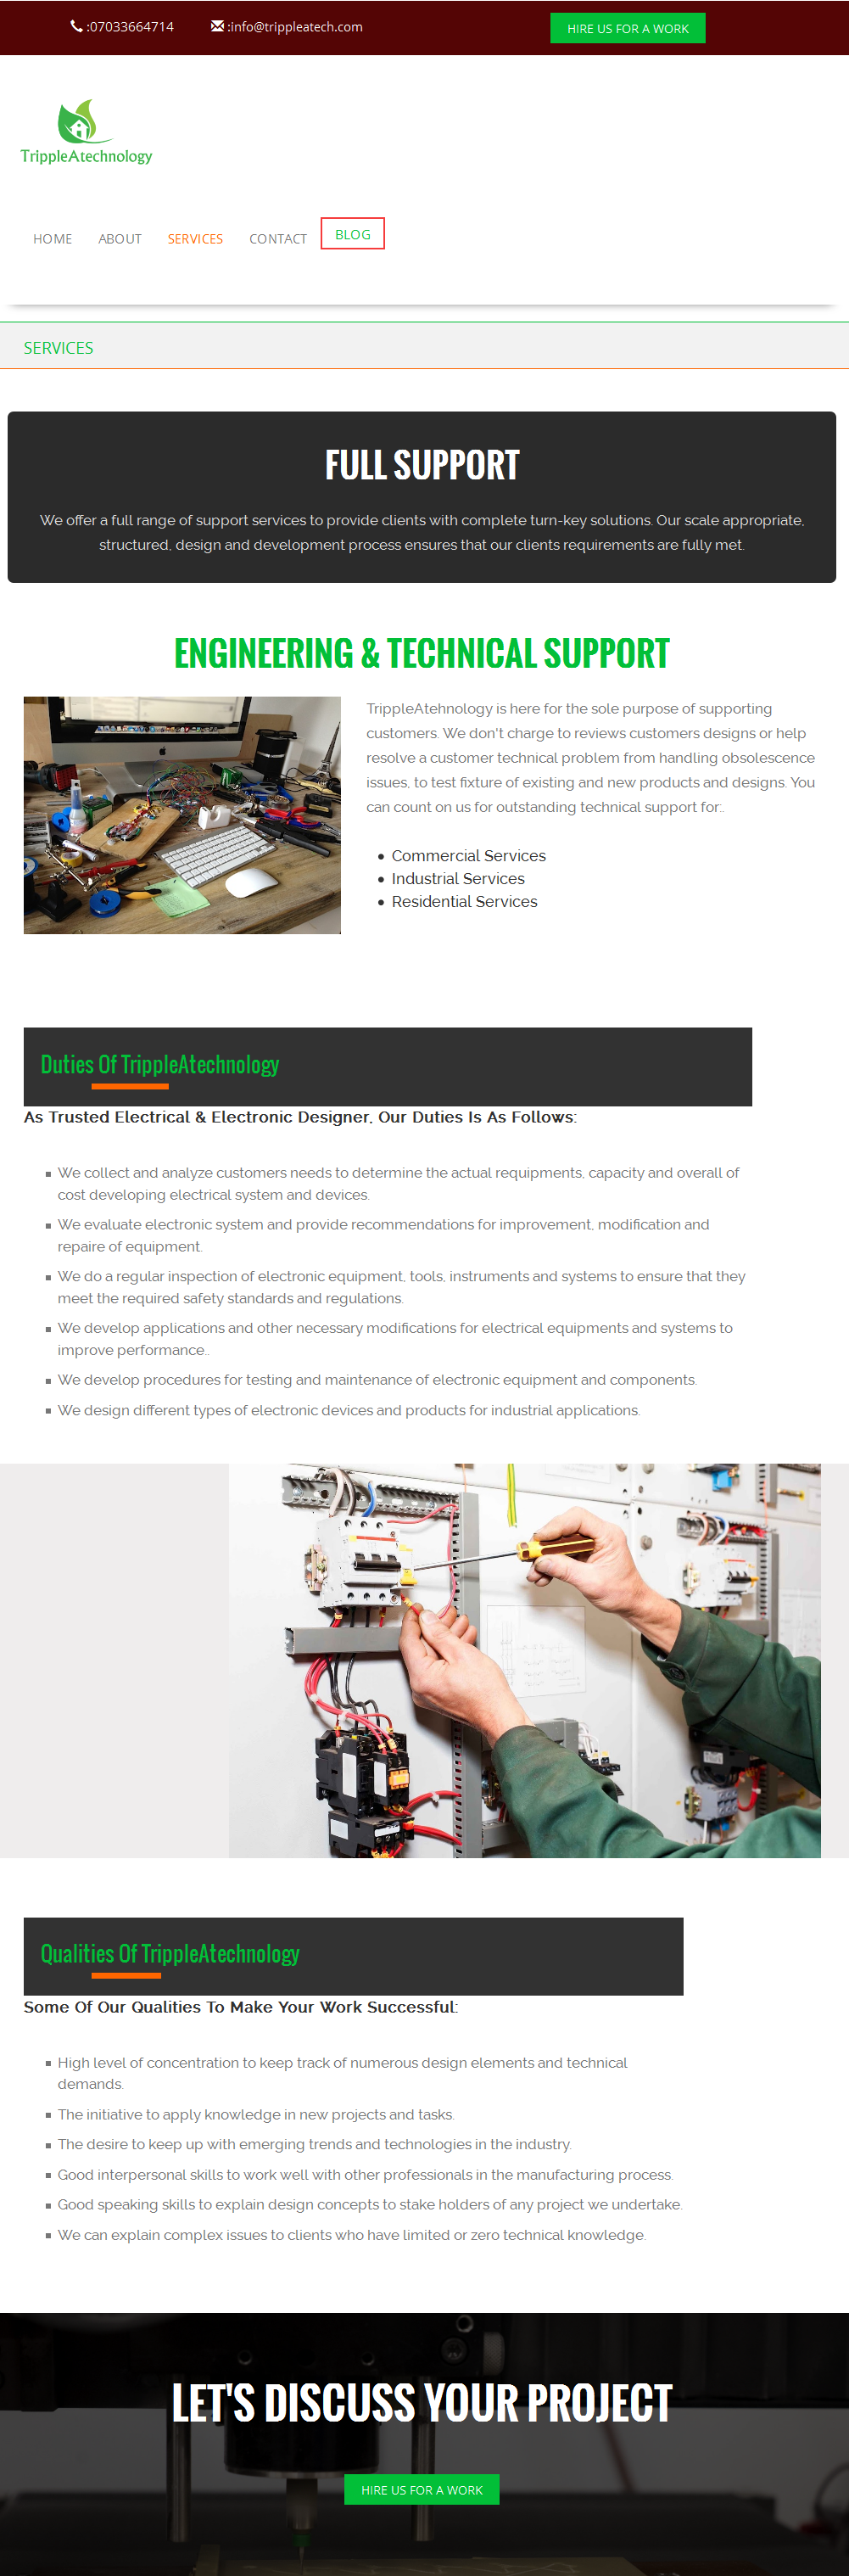 trippleAtechnology- quality and duties of electrical and electronics engineer